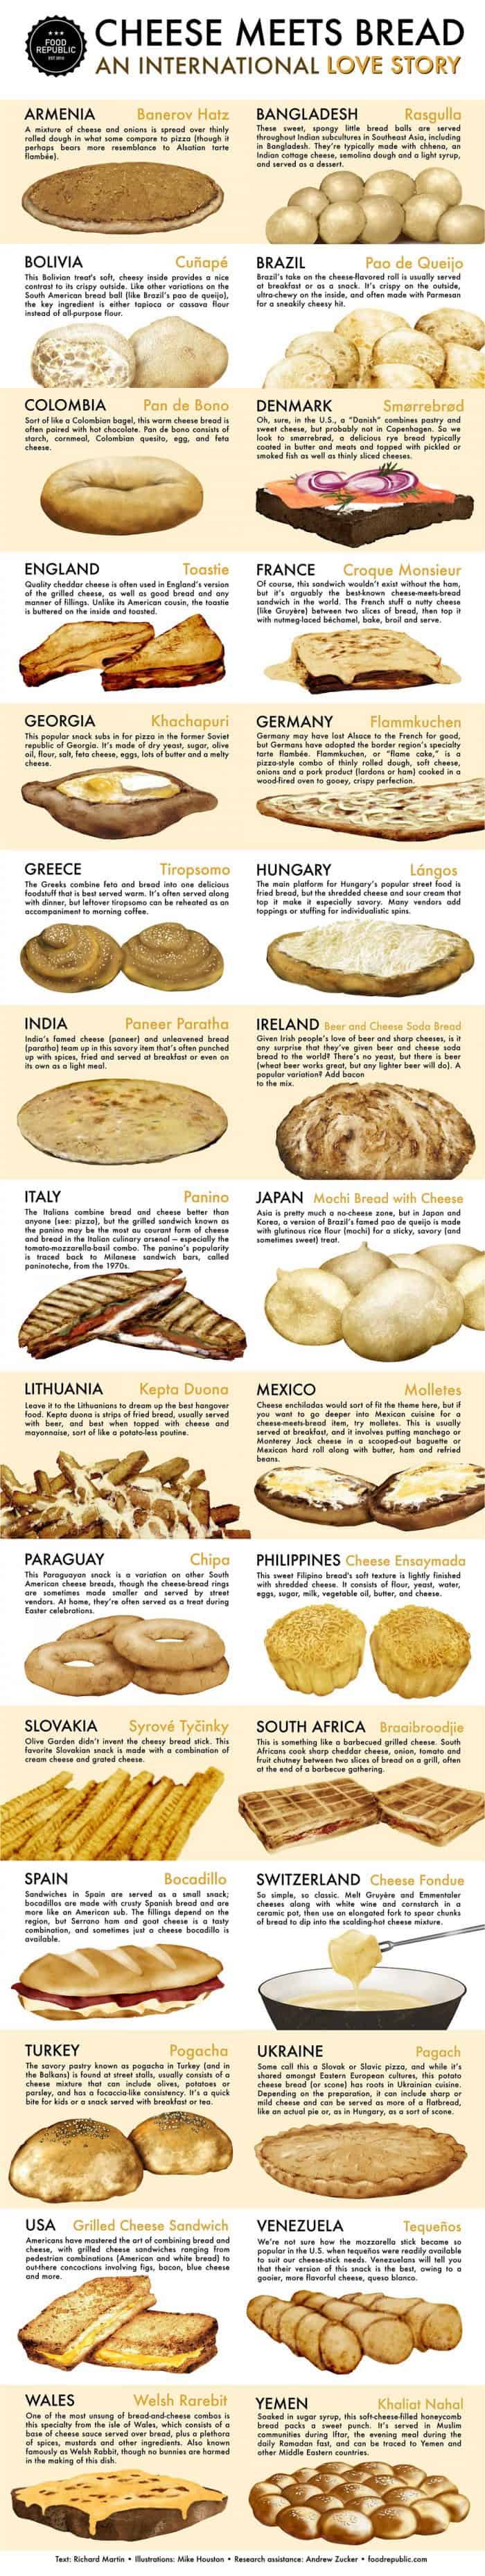 Cheese and Bread Combos